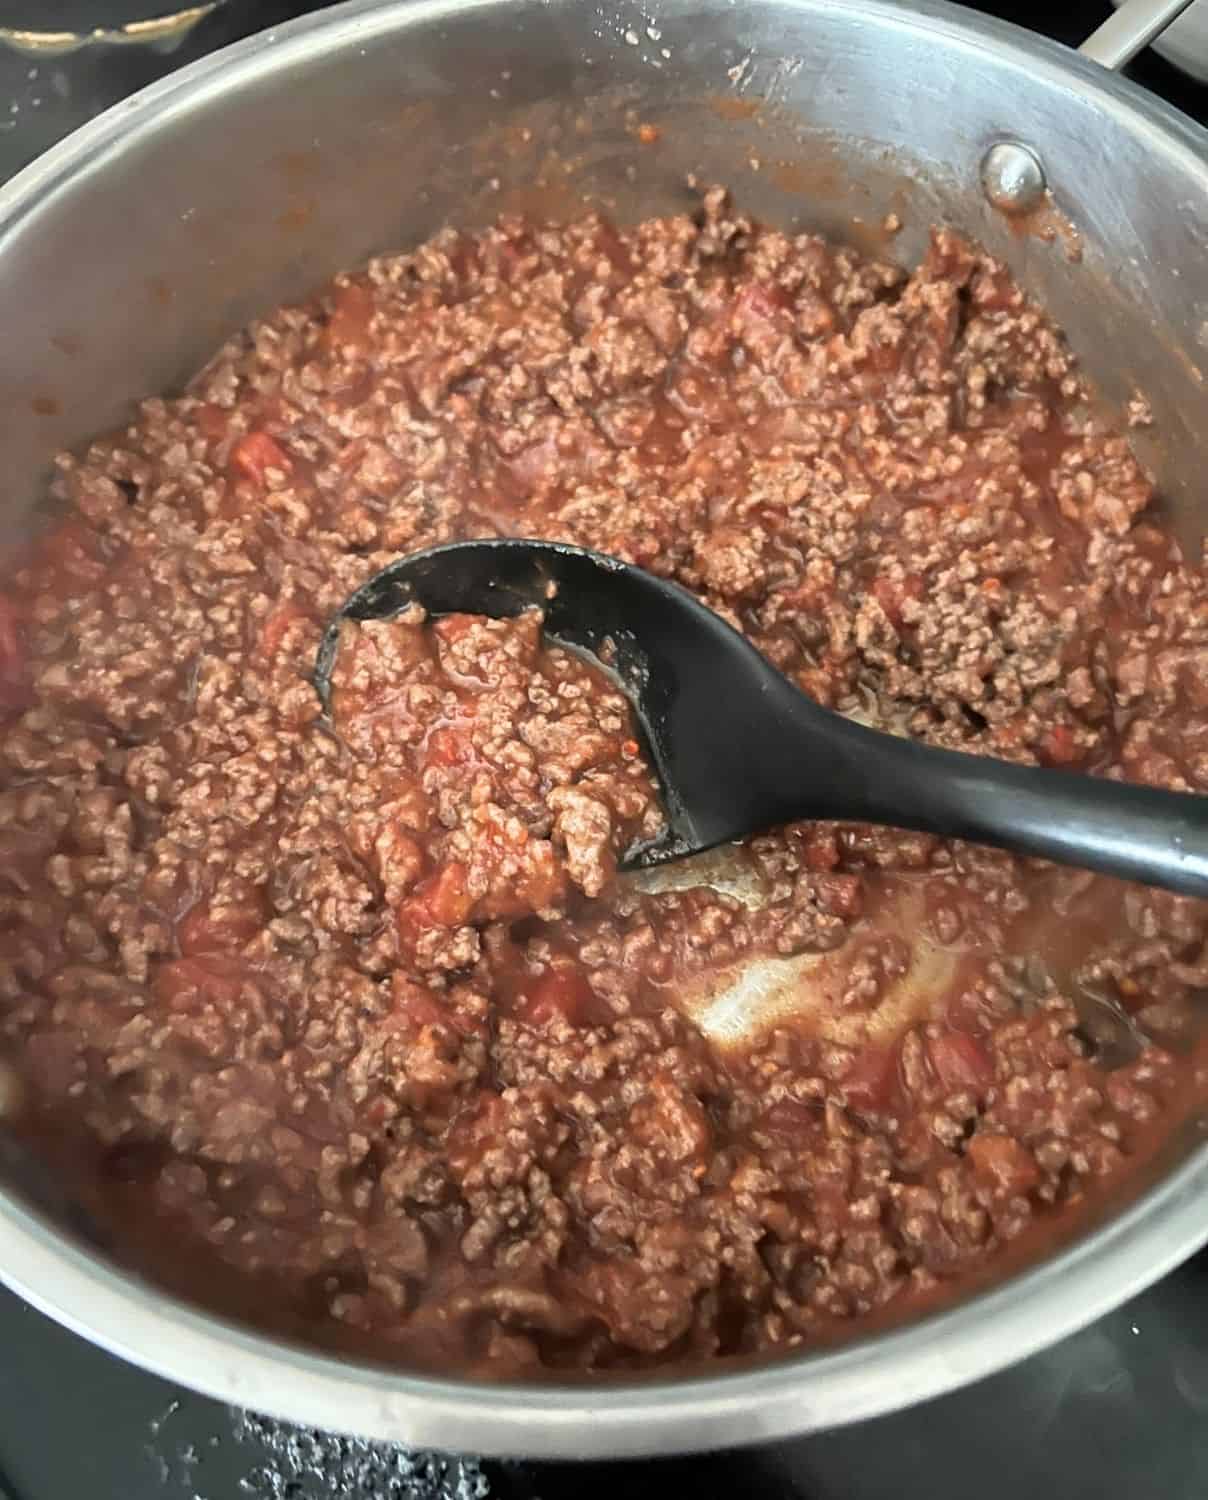 Cooked ground beef and sauce in a skillet. 